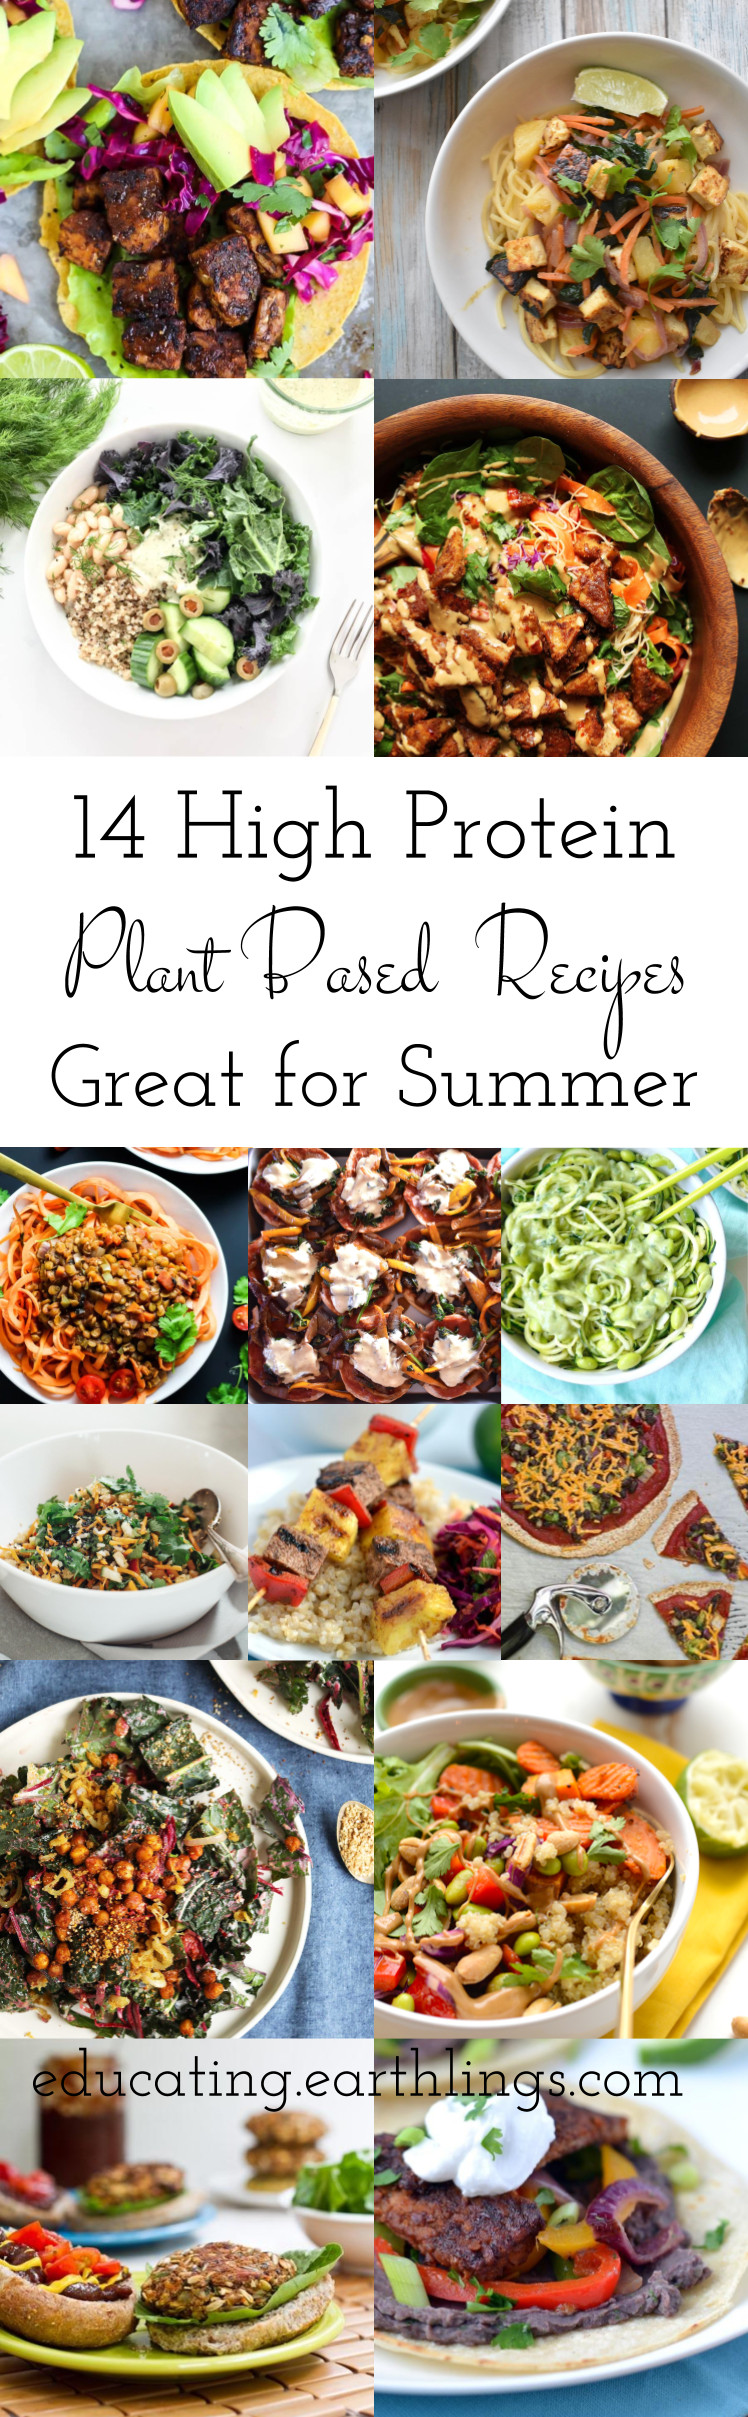 High Protein Plant Based Recipes
 14 High Protein Plant Based Recipes